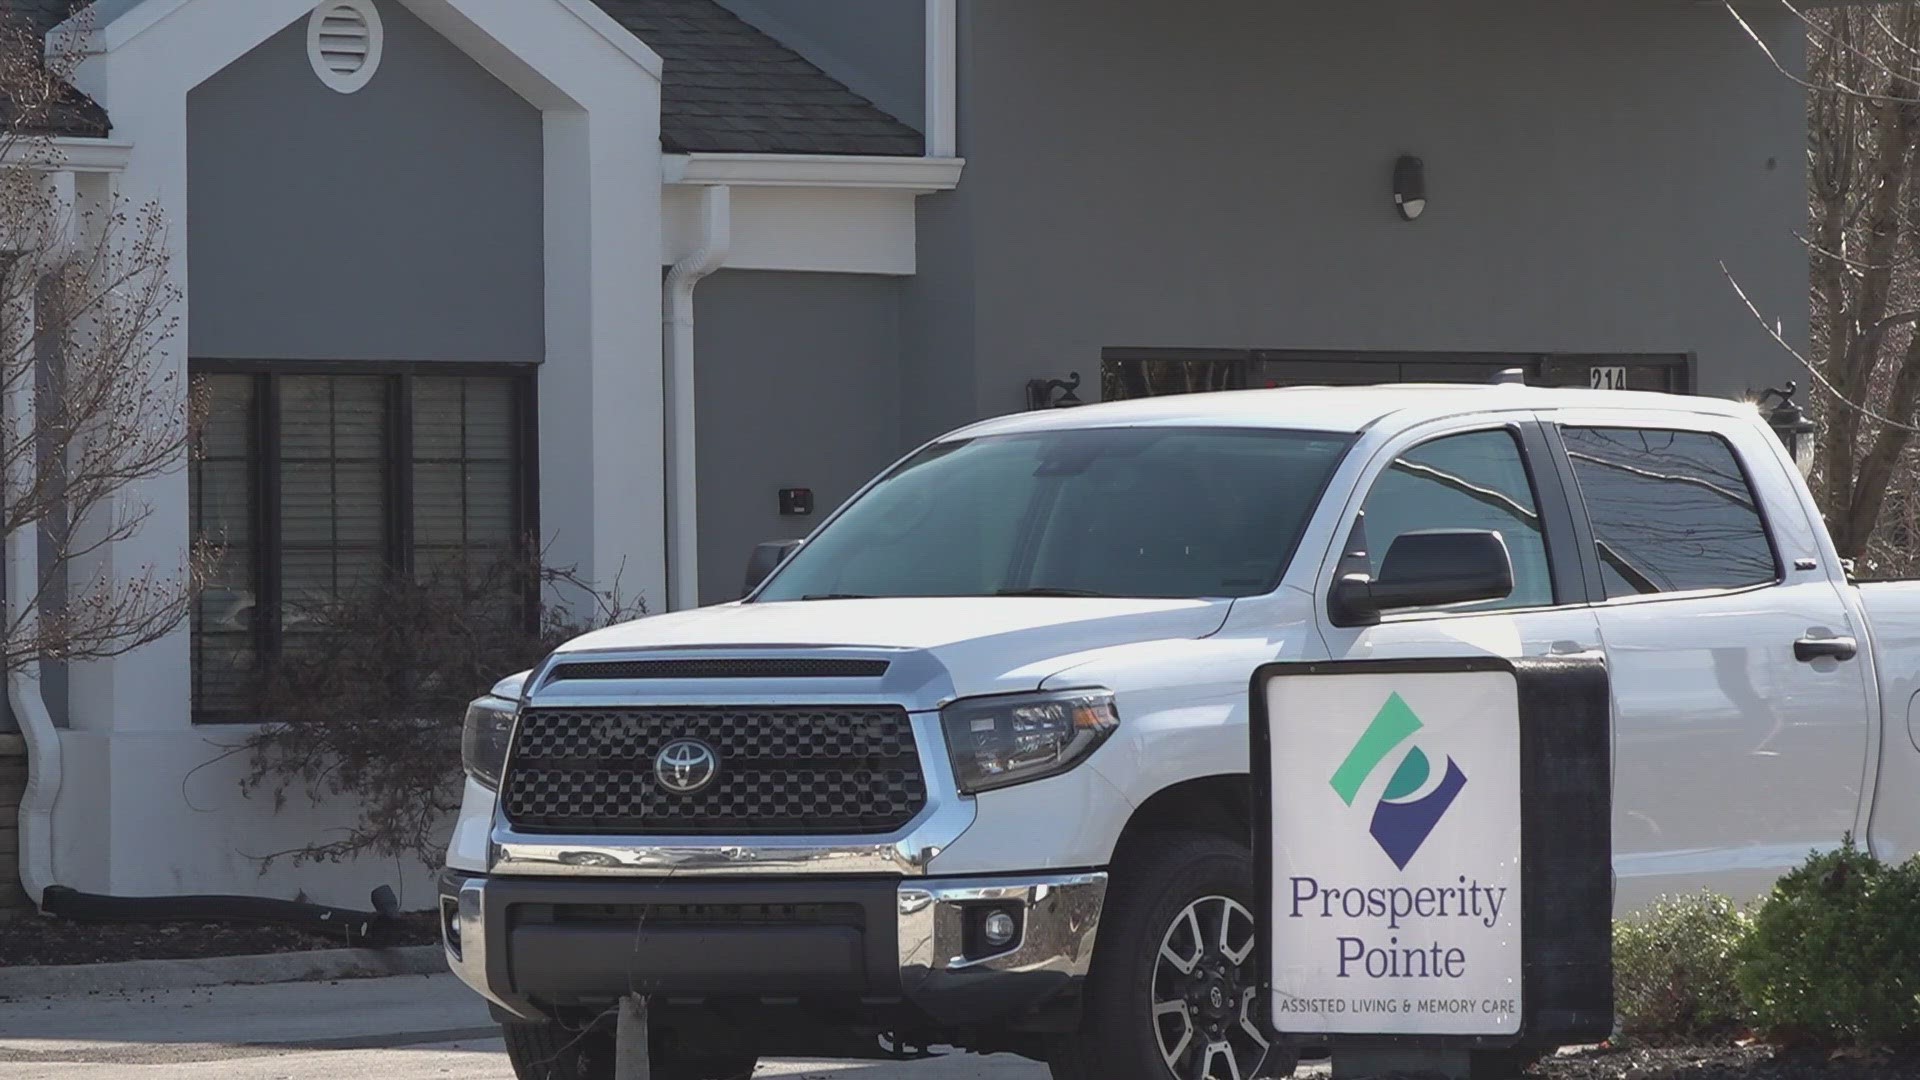 "Any decision regarding patient relocation and timing has been made by Prosperity Pointe, not Knoxcare Properties," Grayson Schleppegrell from Knoxcare said.